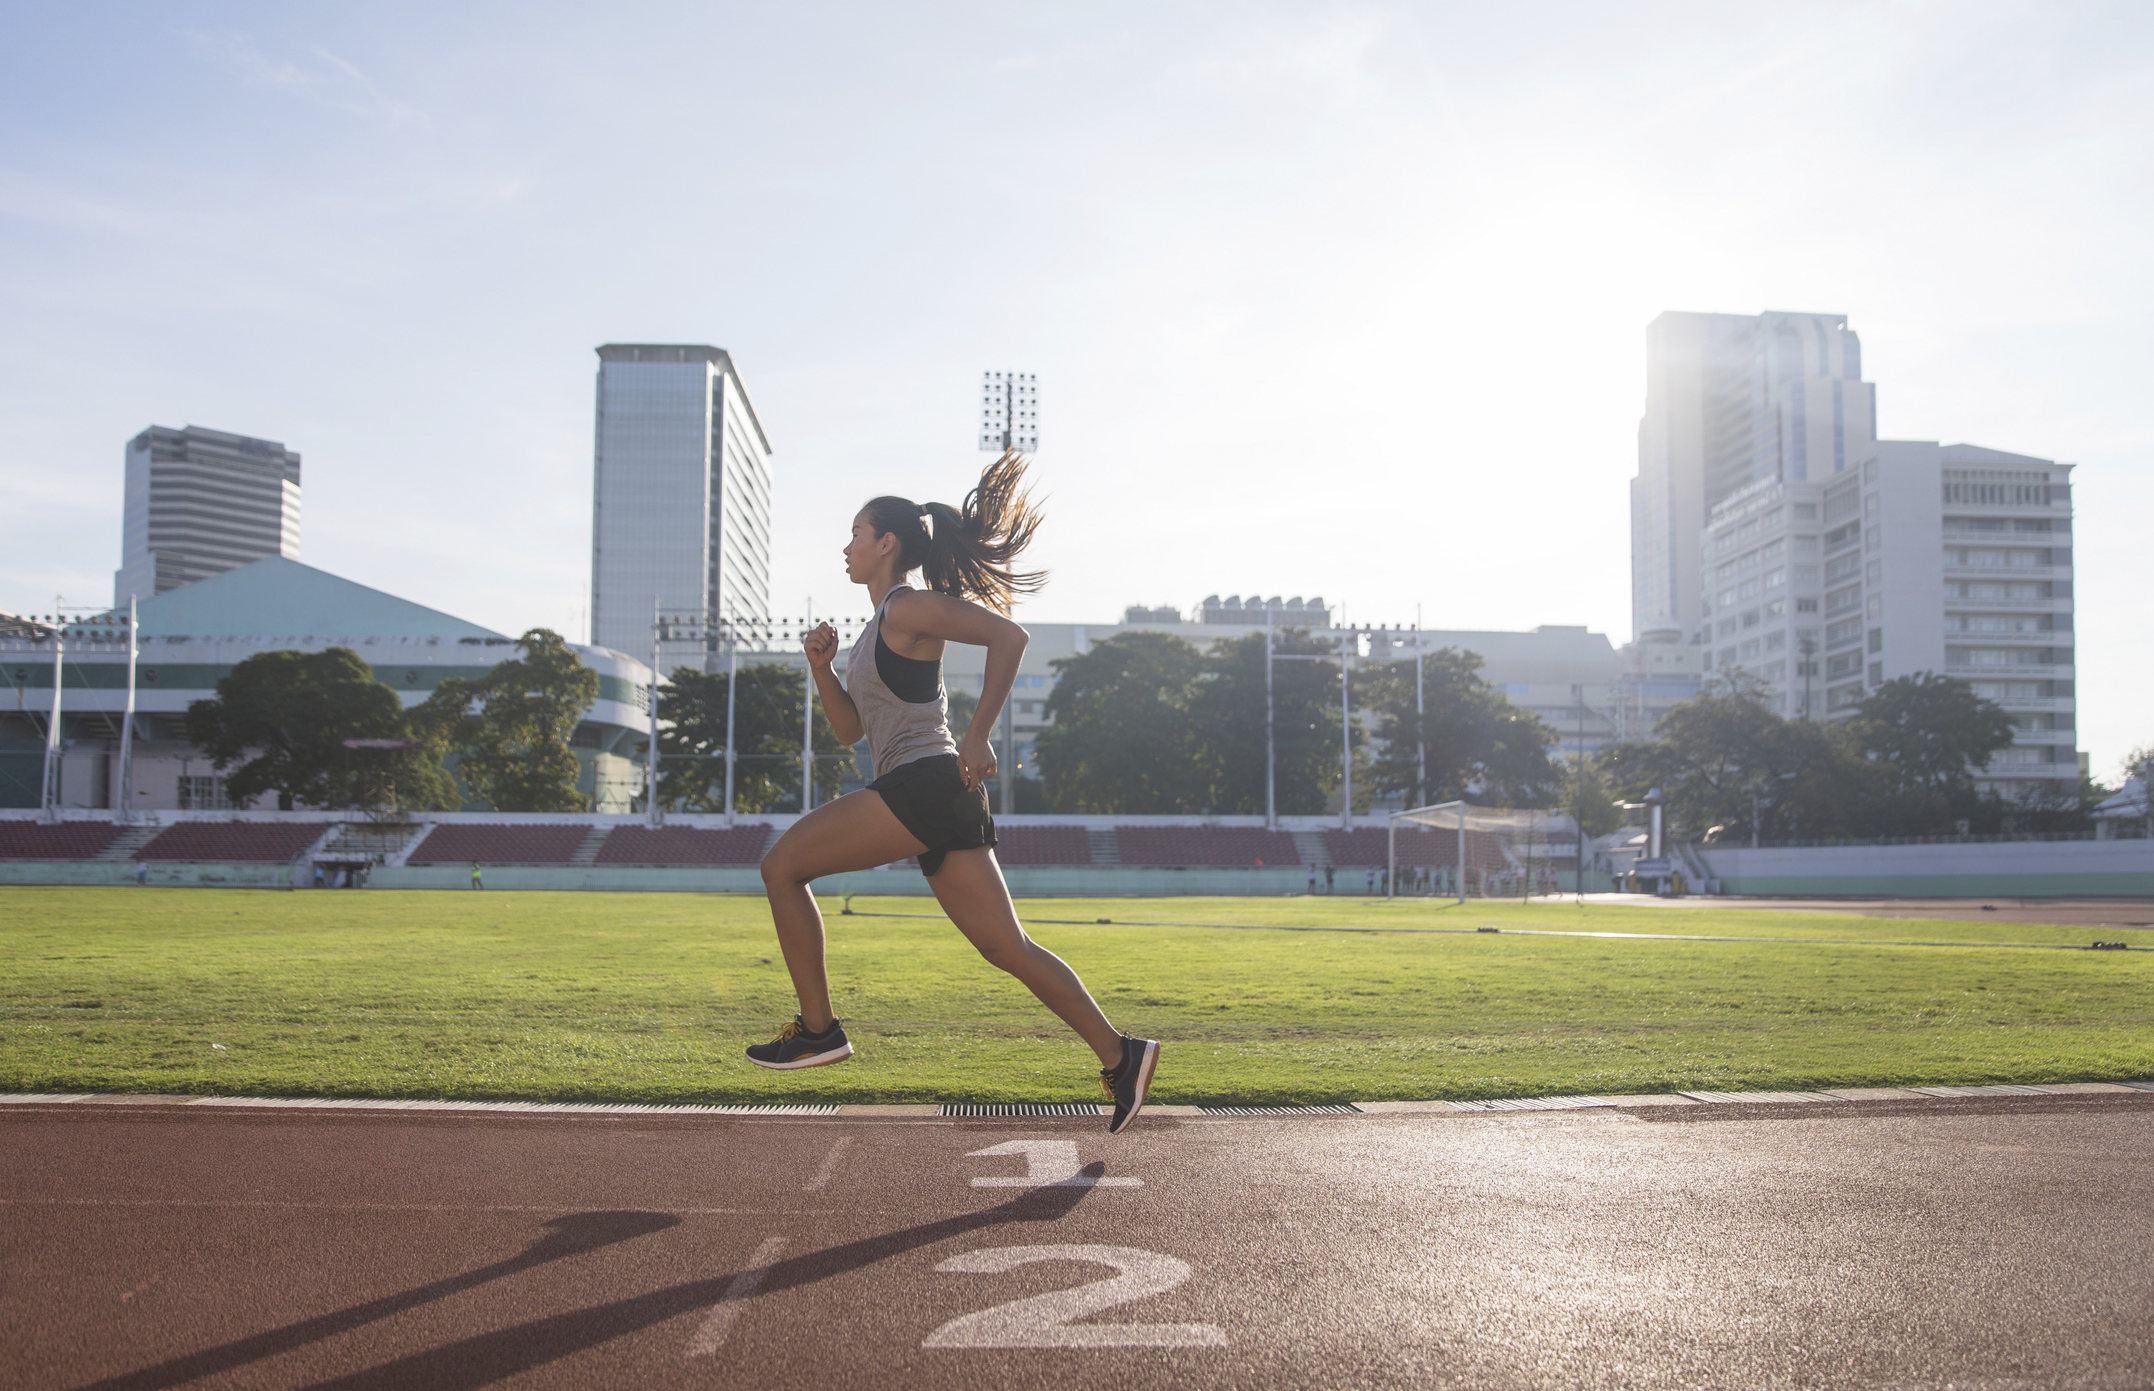 A woman is running on a track in an urban stadium with skyscrapers and greenery in the background